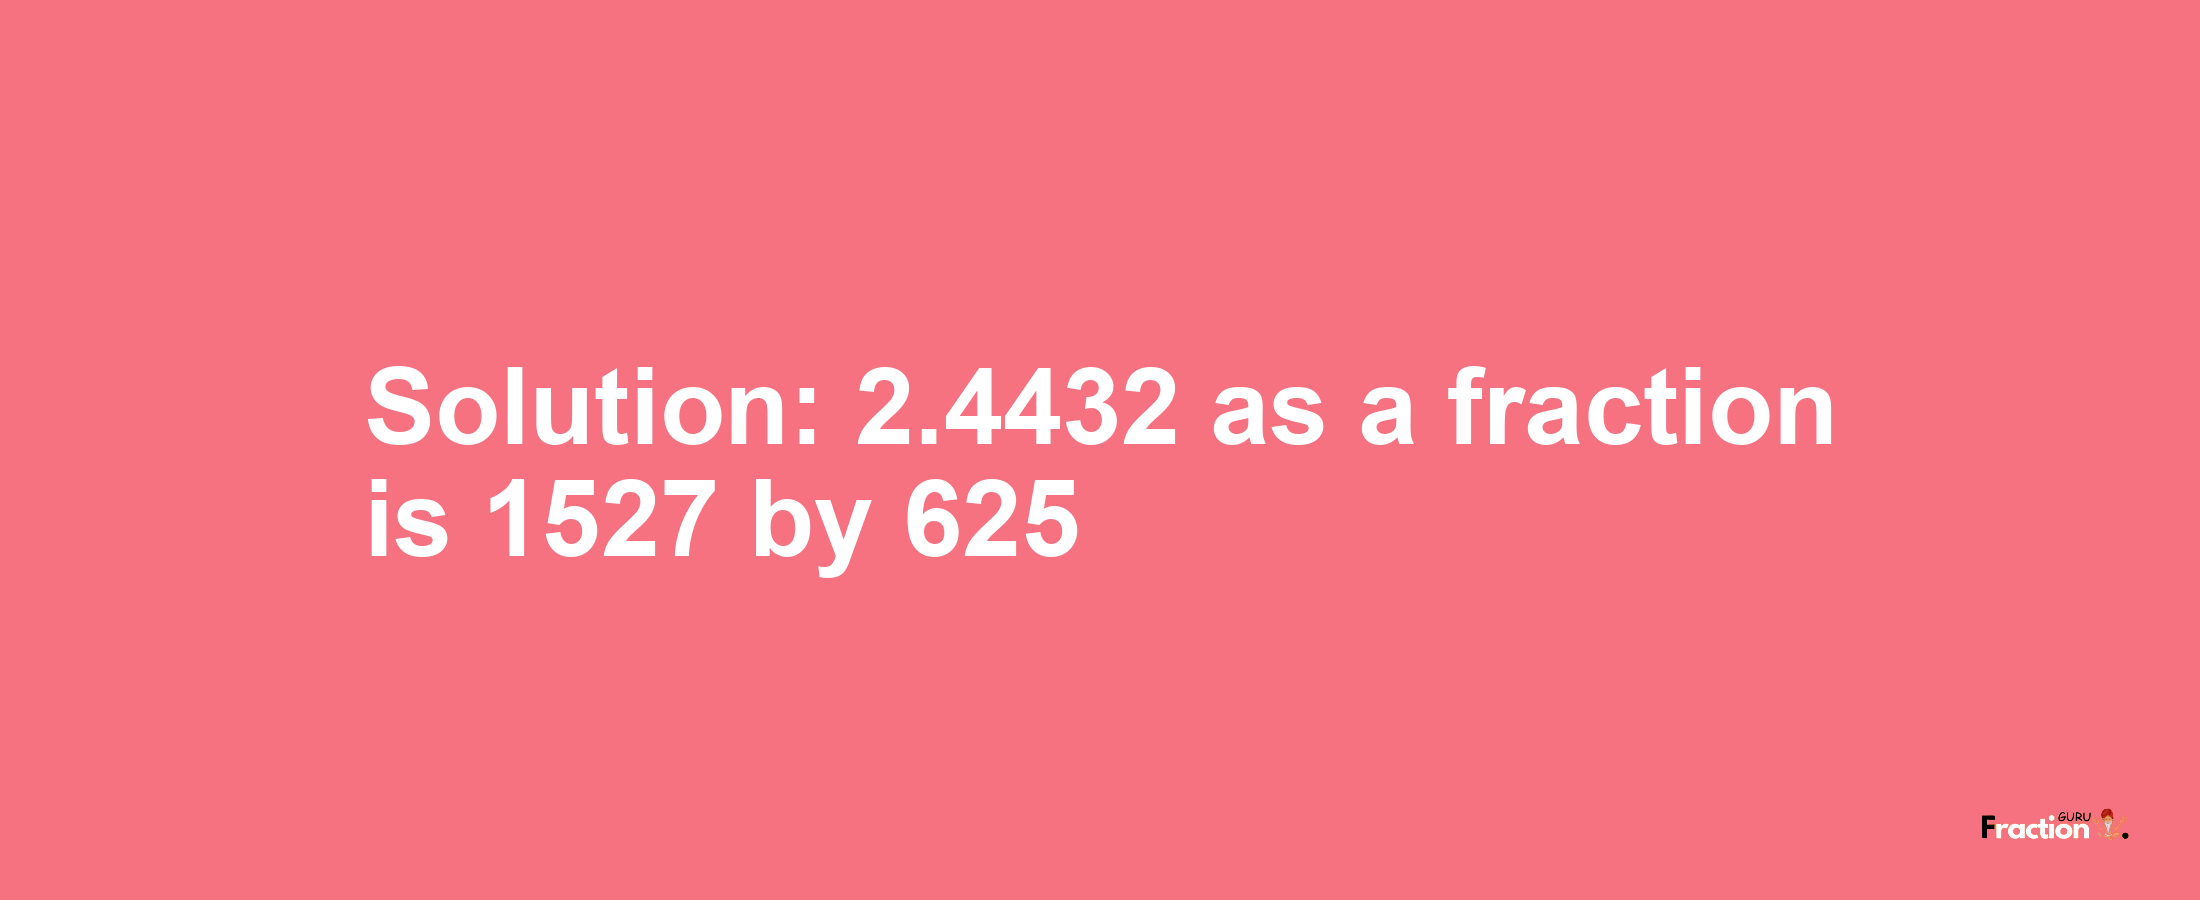 Solution:2.4432 as a fraction is 1527/625